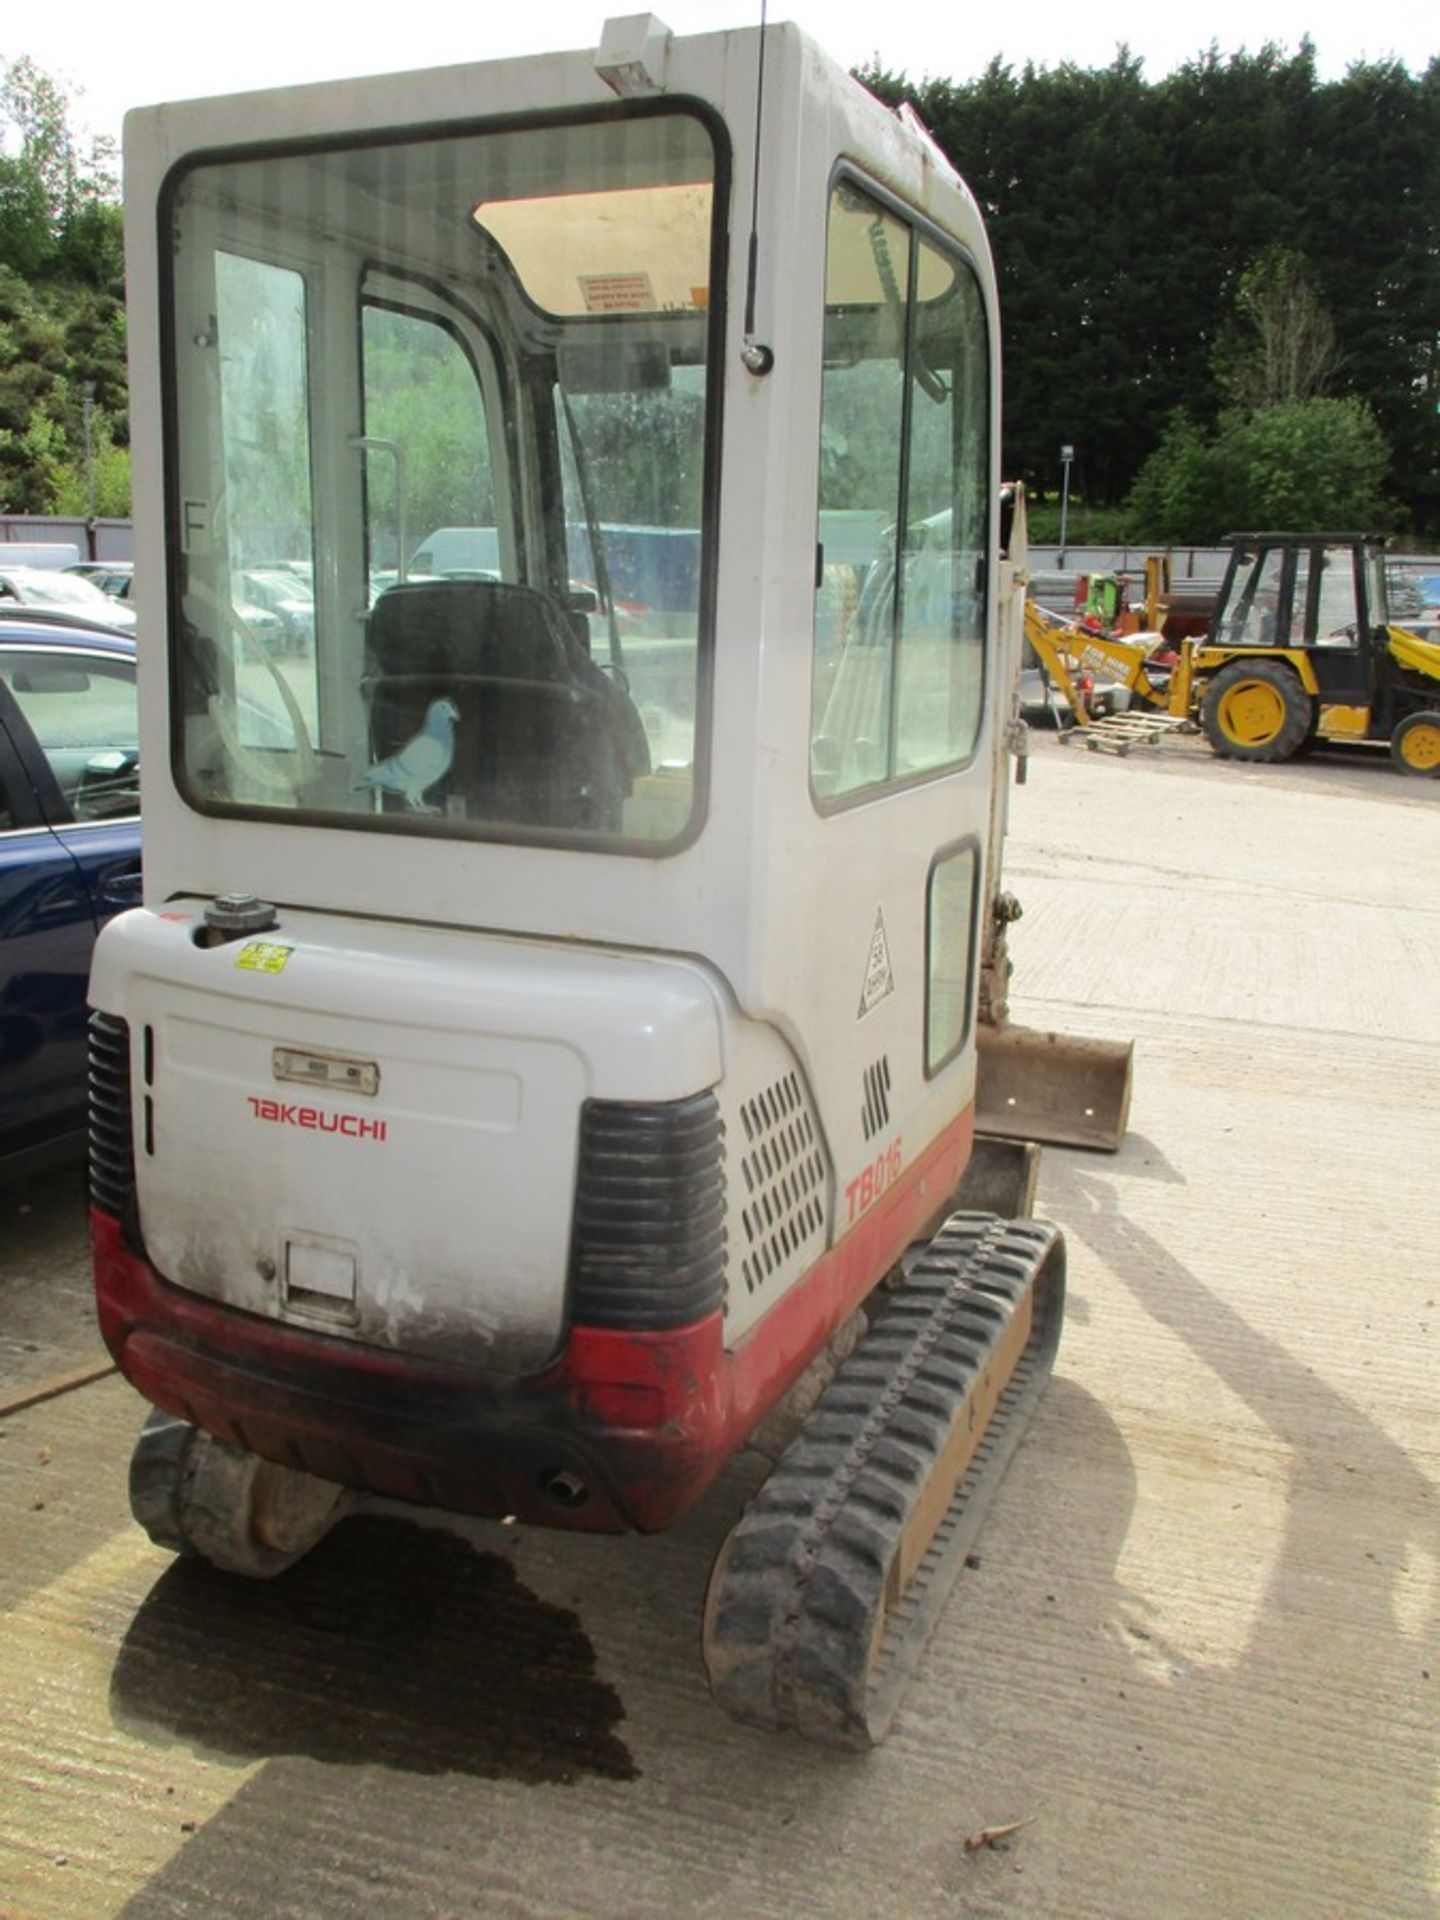 TAKEUCHI TB106 MINI DIGGER C.W 1 BUCKET 2013 3700HRS FULL CAB (DIRECT FROM A COMPANY) - Image 5 of 8